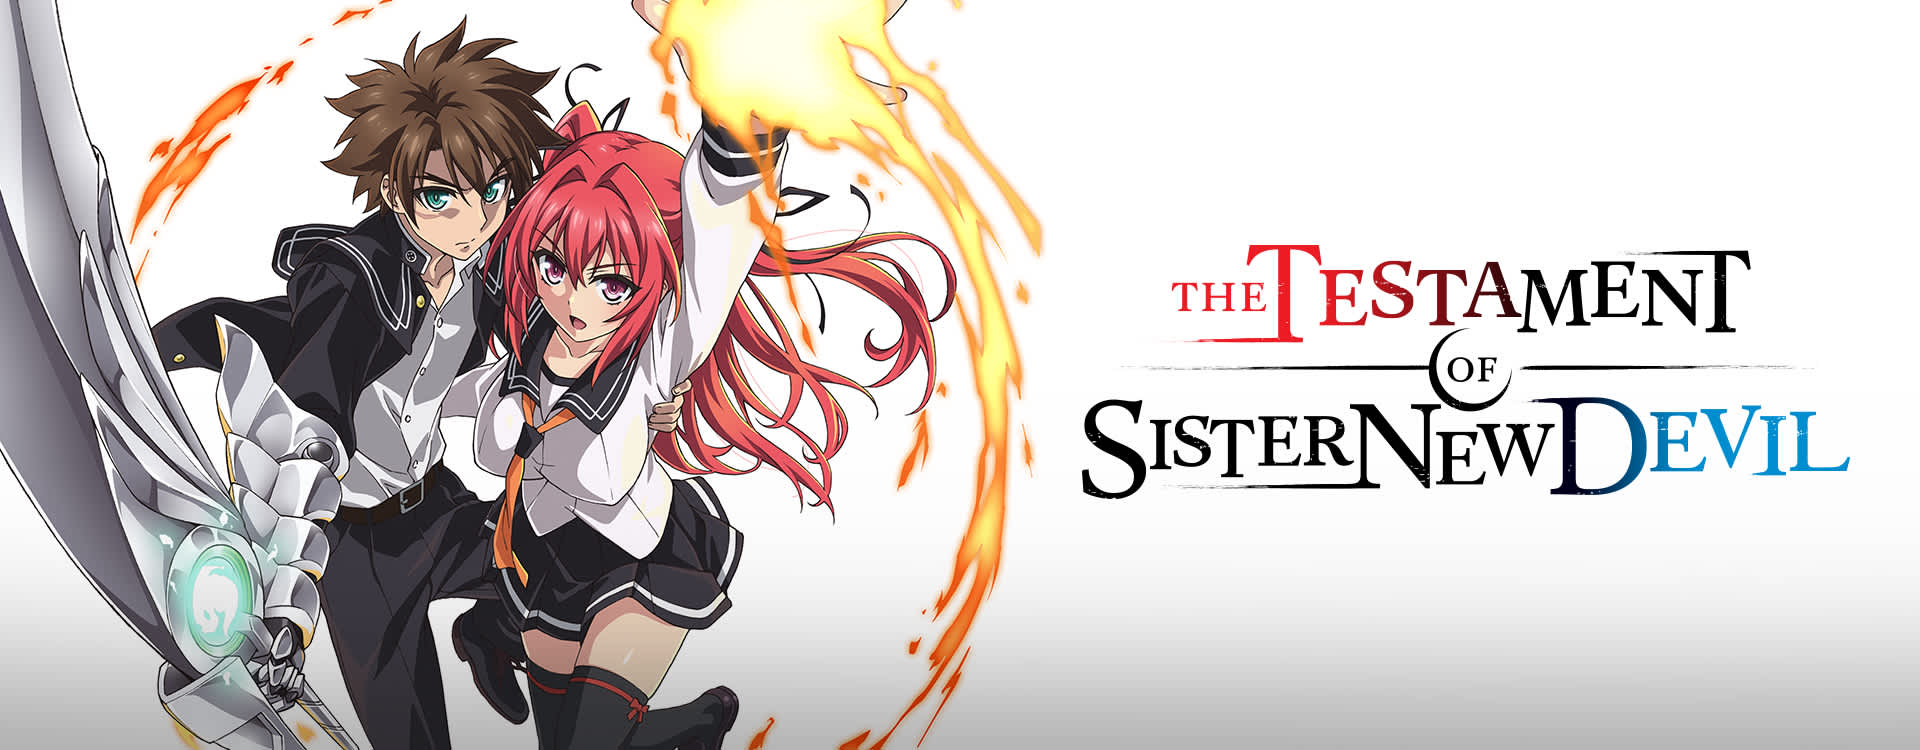 Watch The Testament Of Sister New Devil Episodes Sub Dub